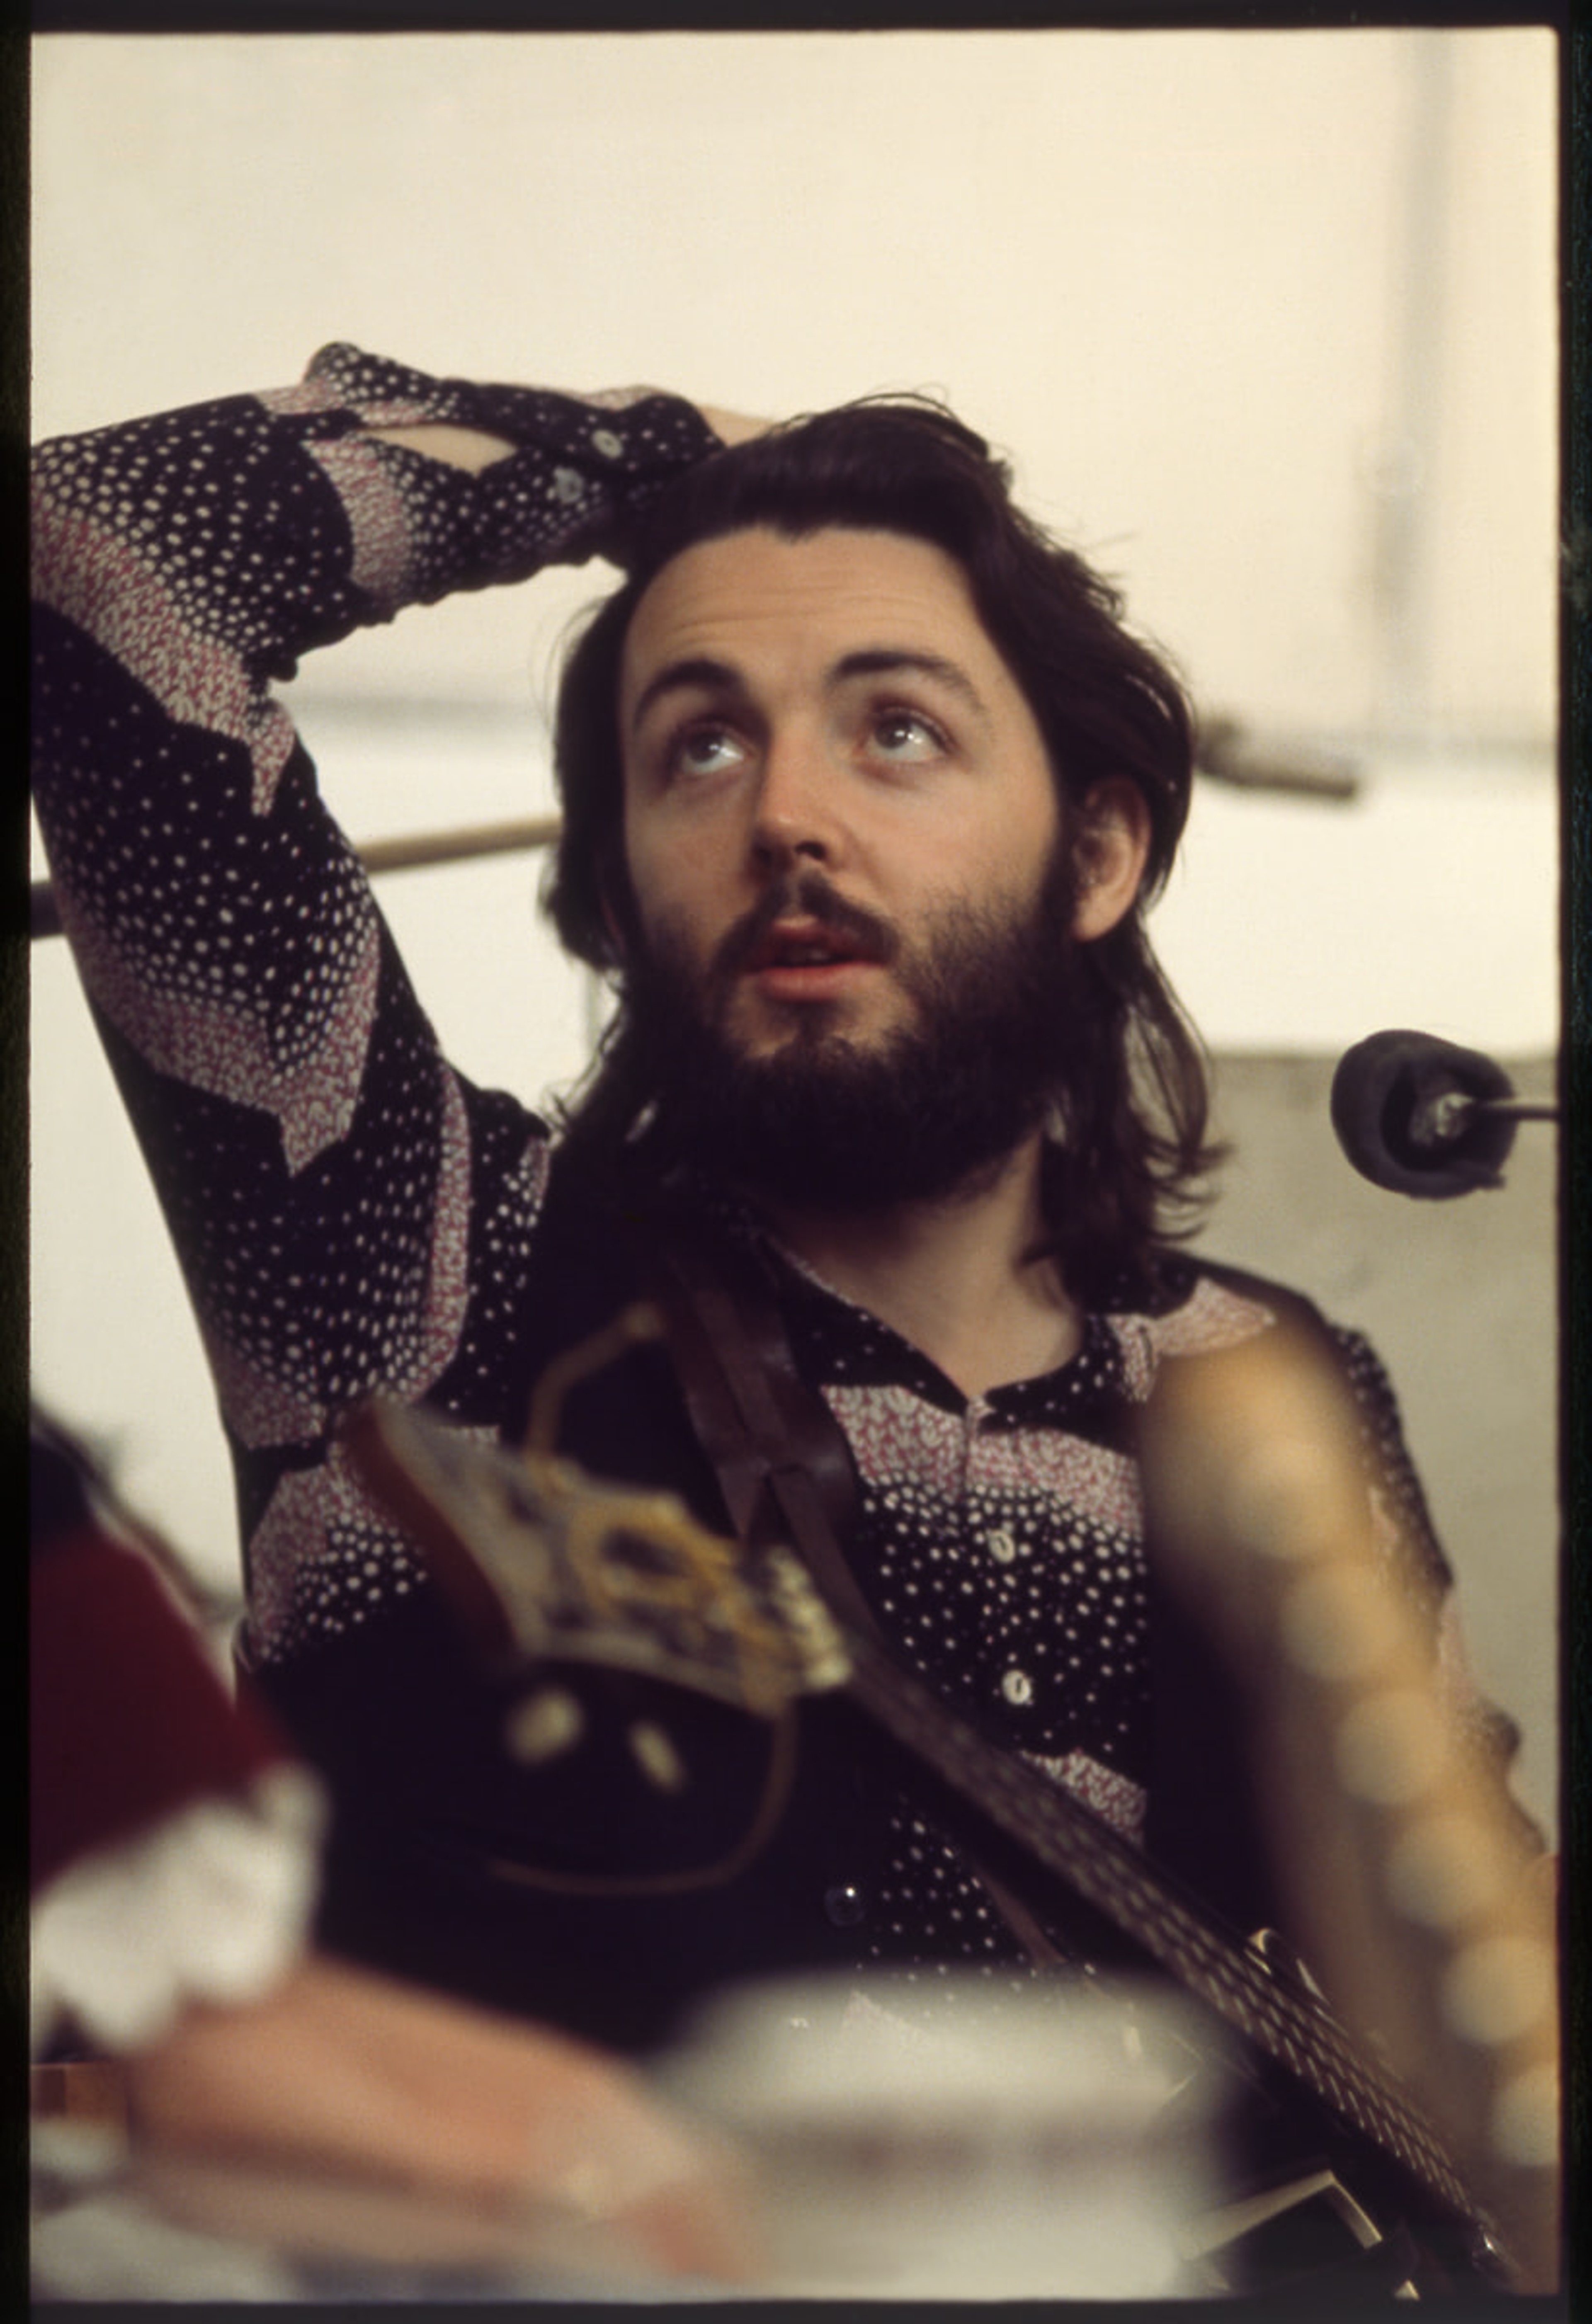 Paul during a Beatles recording session at Apple Studios, London, 1969. Photo by Linda McCartney